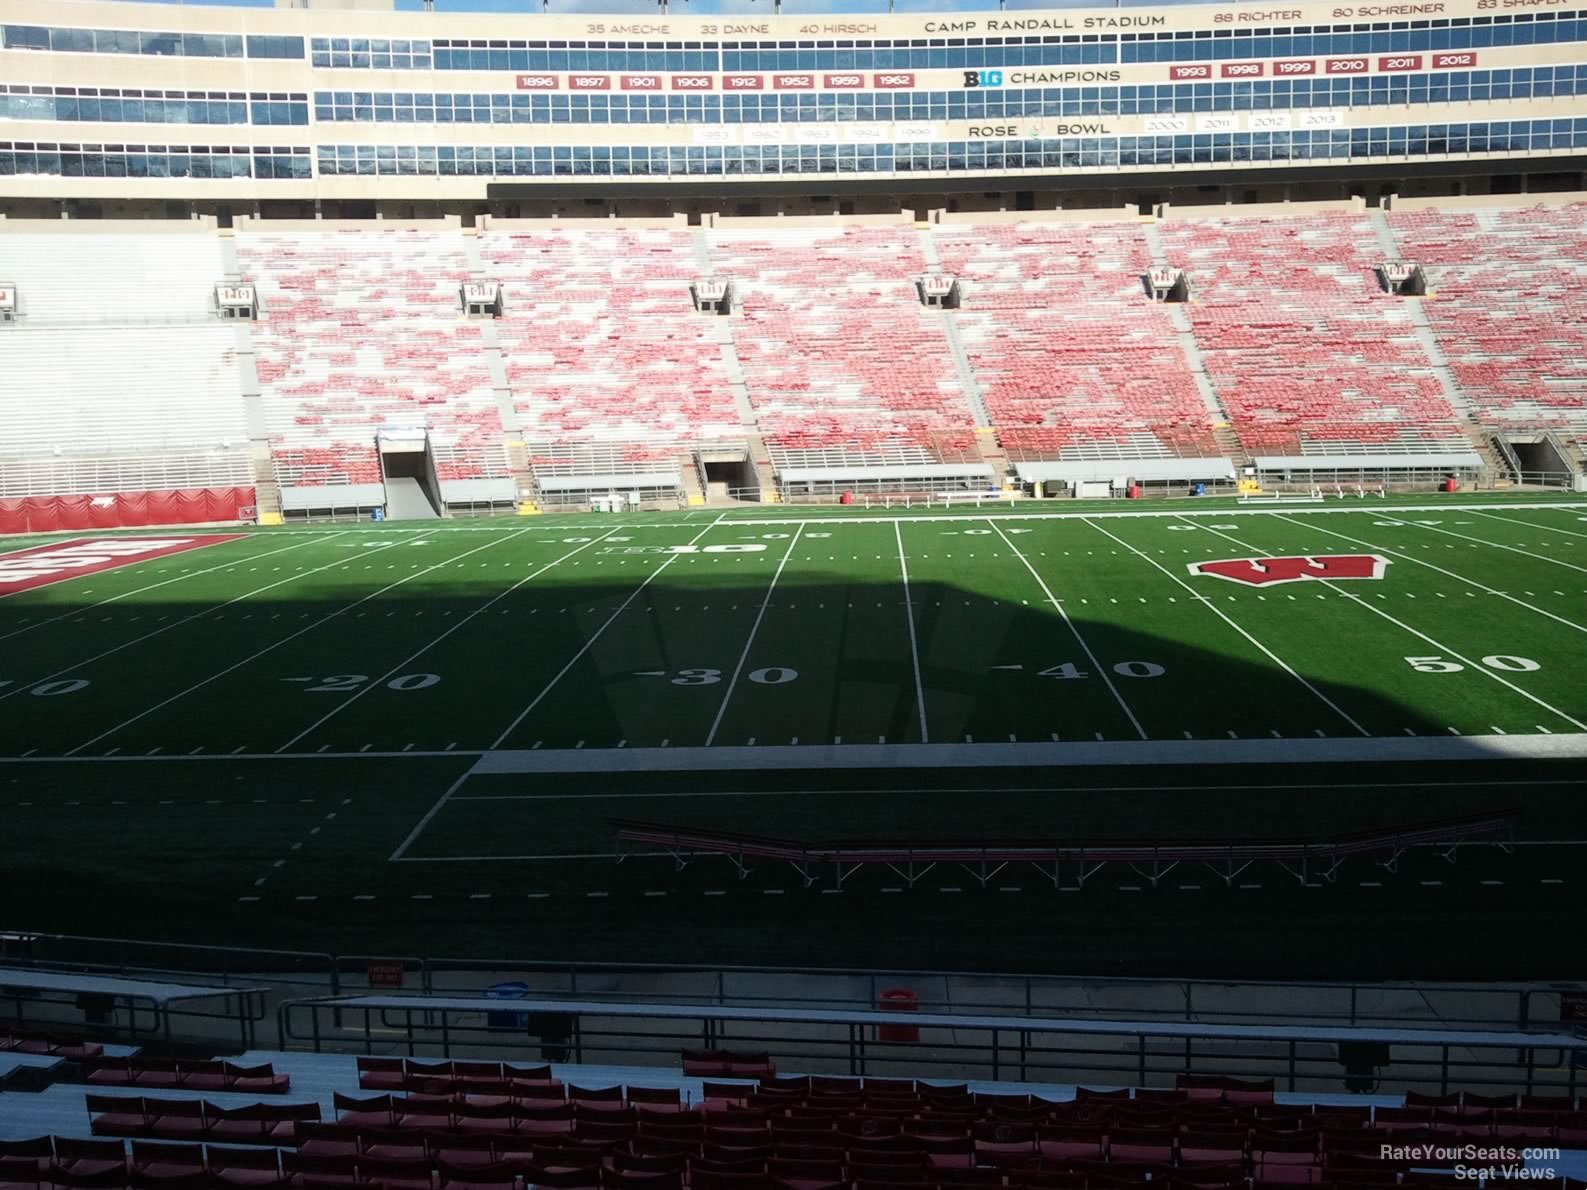 section f, row 30 seat view  - camp randall stadium